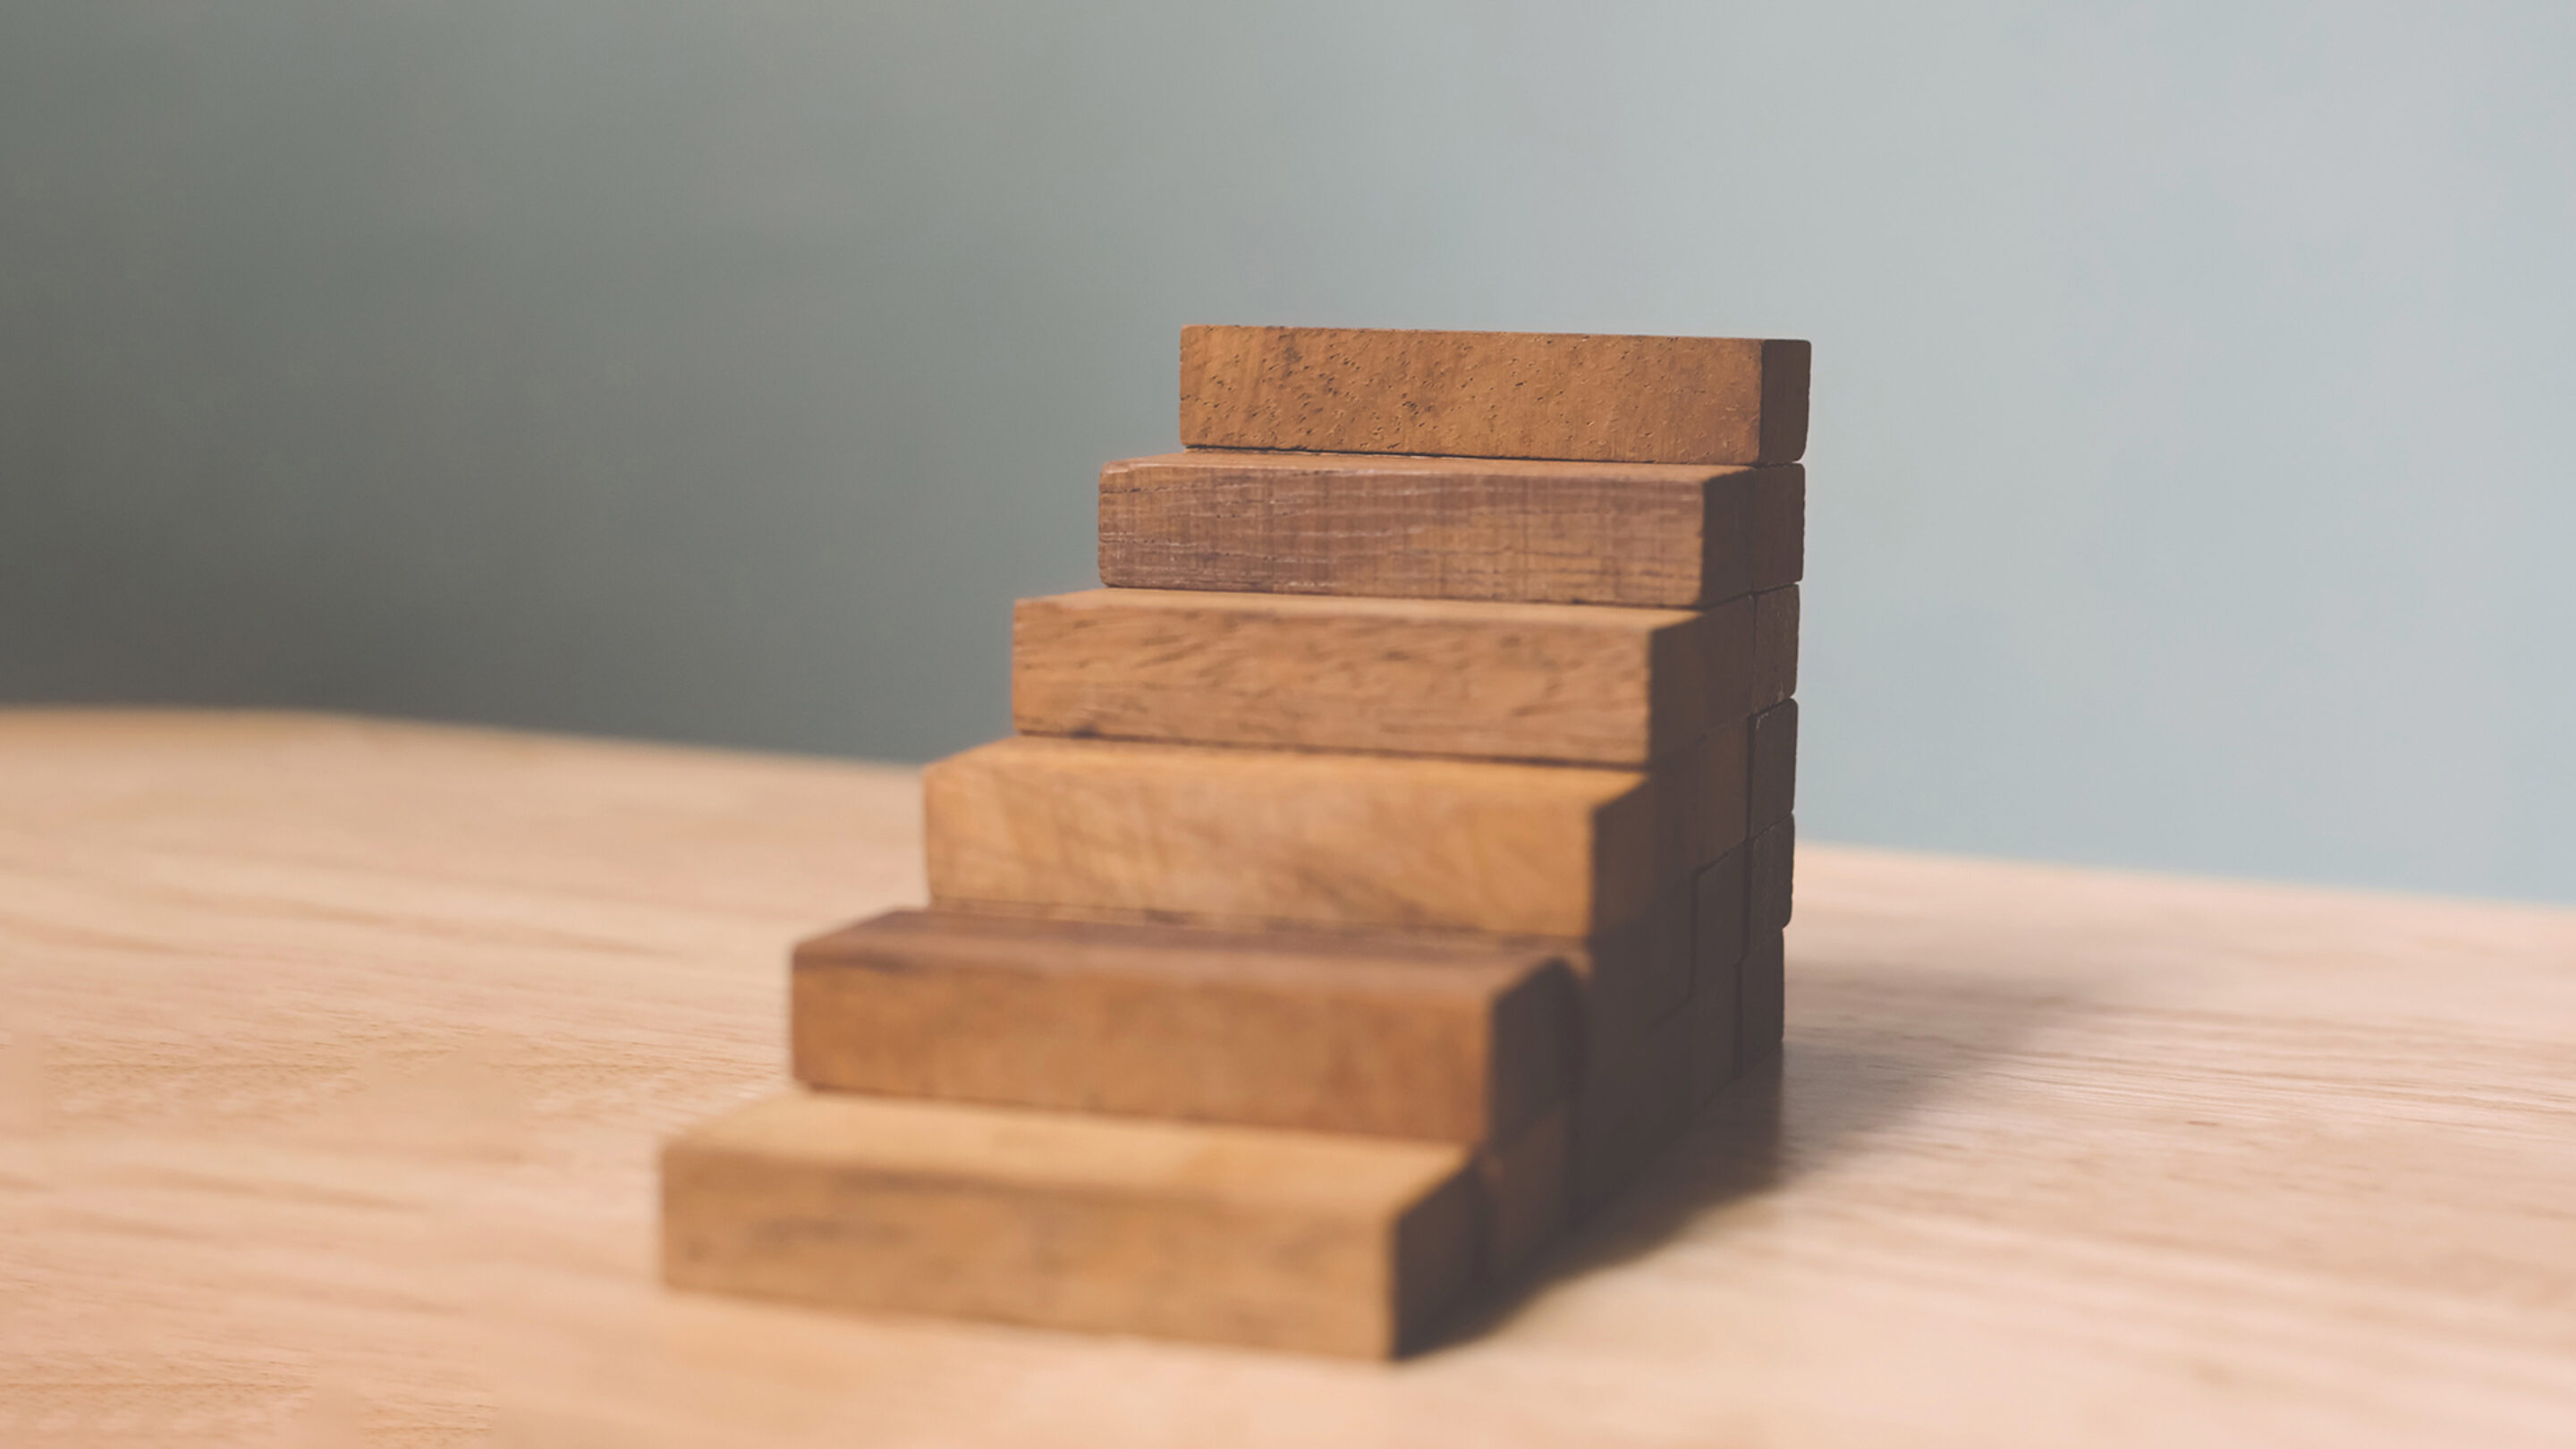 Blocks of wood stacked to make a staircase.